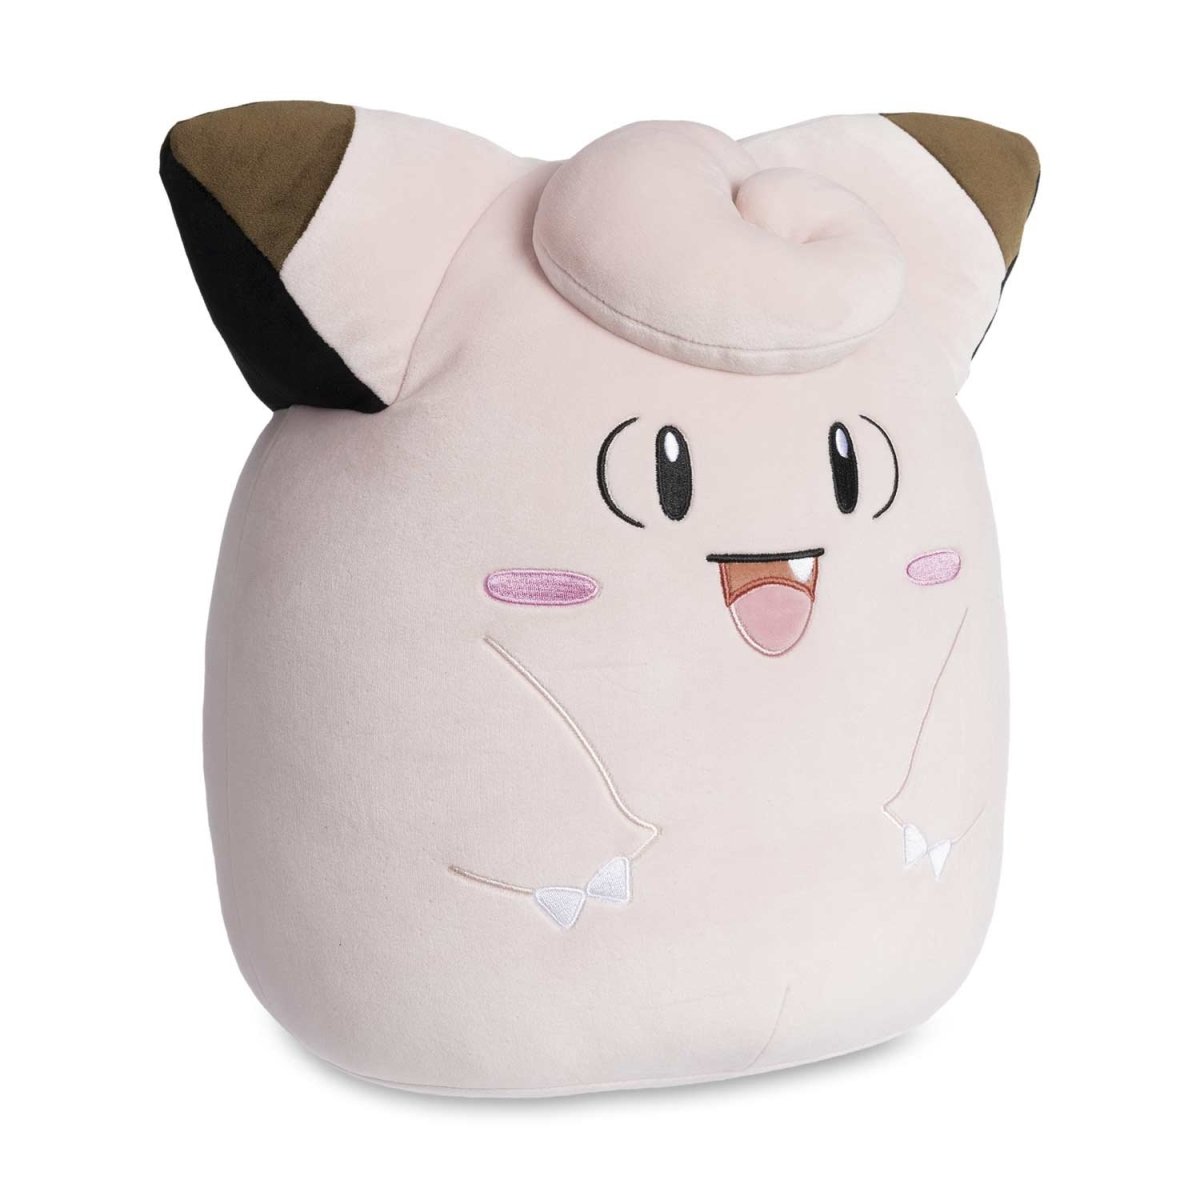 Clefairy Squishmallows Plush - 12 In.